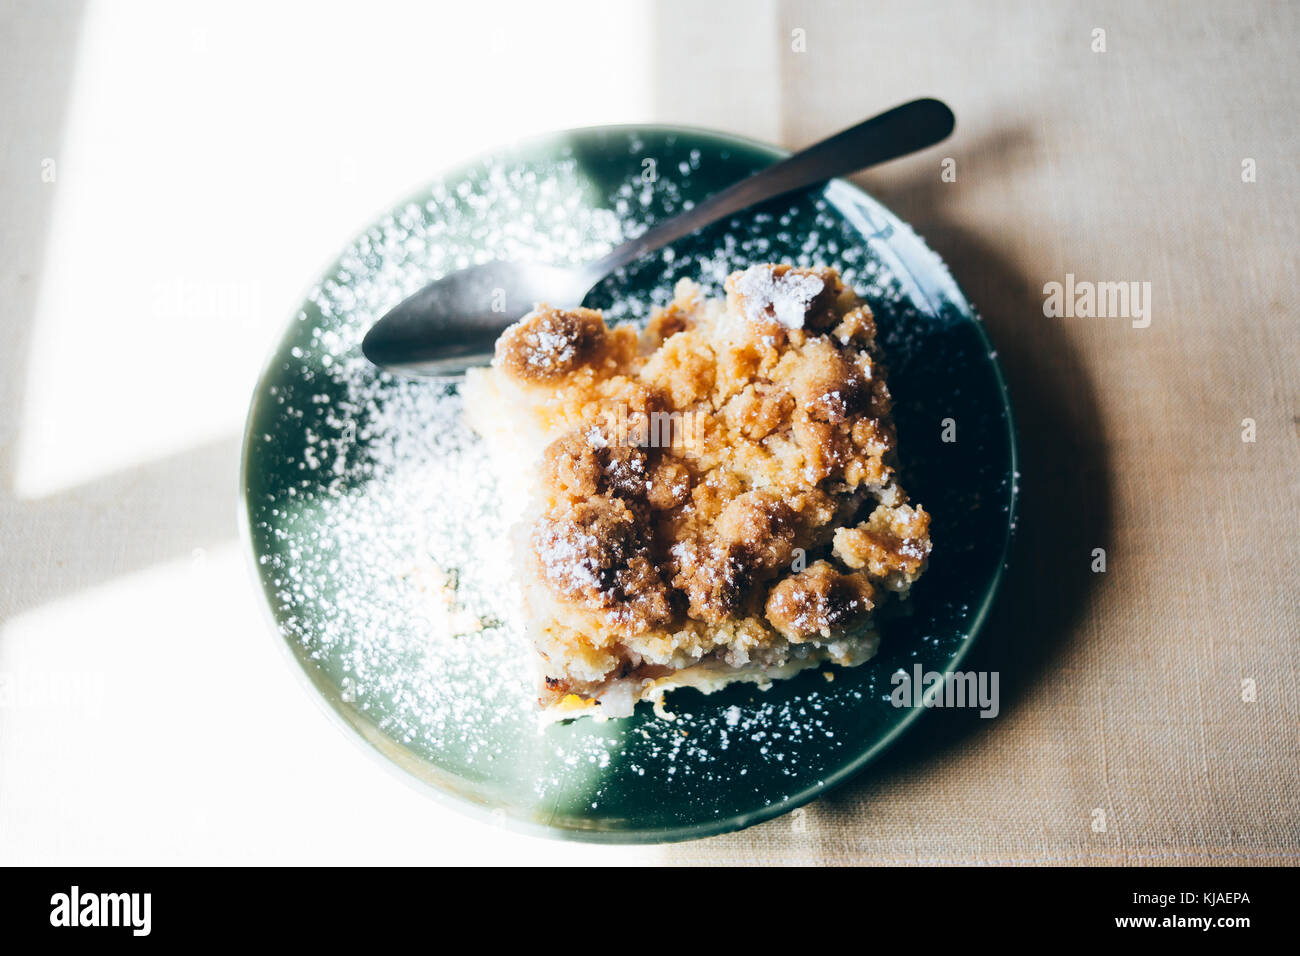 Apple crumble cake on a green plate on a wooden table Stock Photo